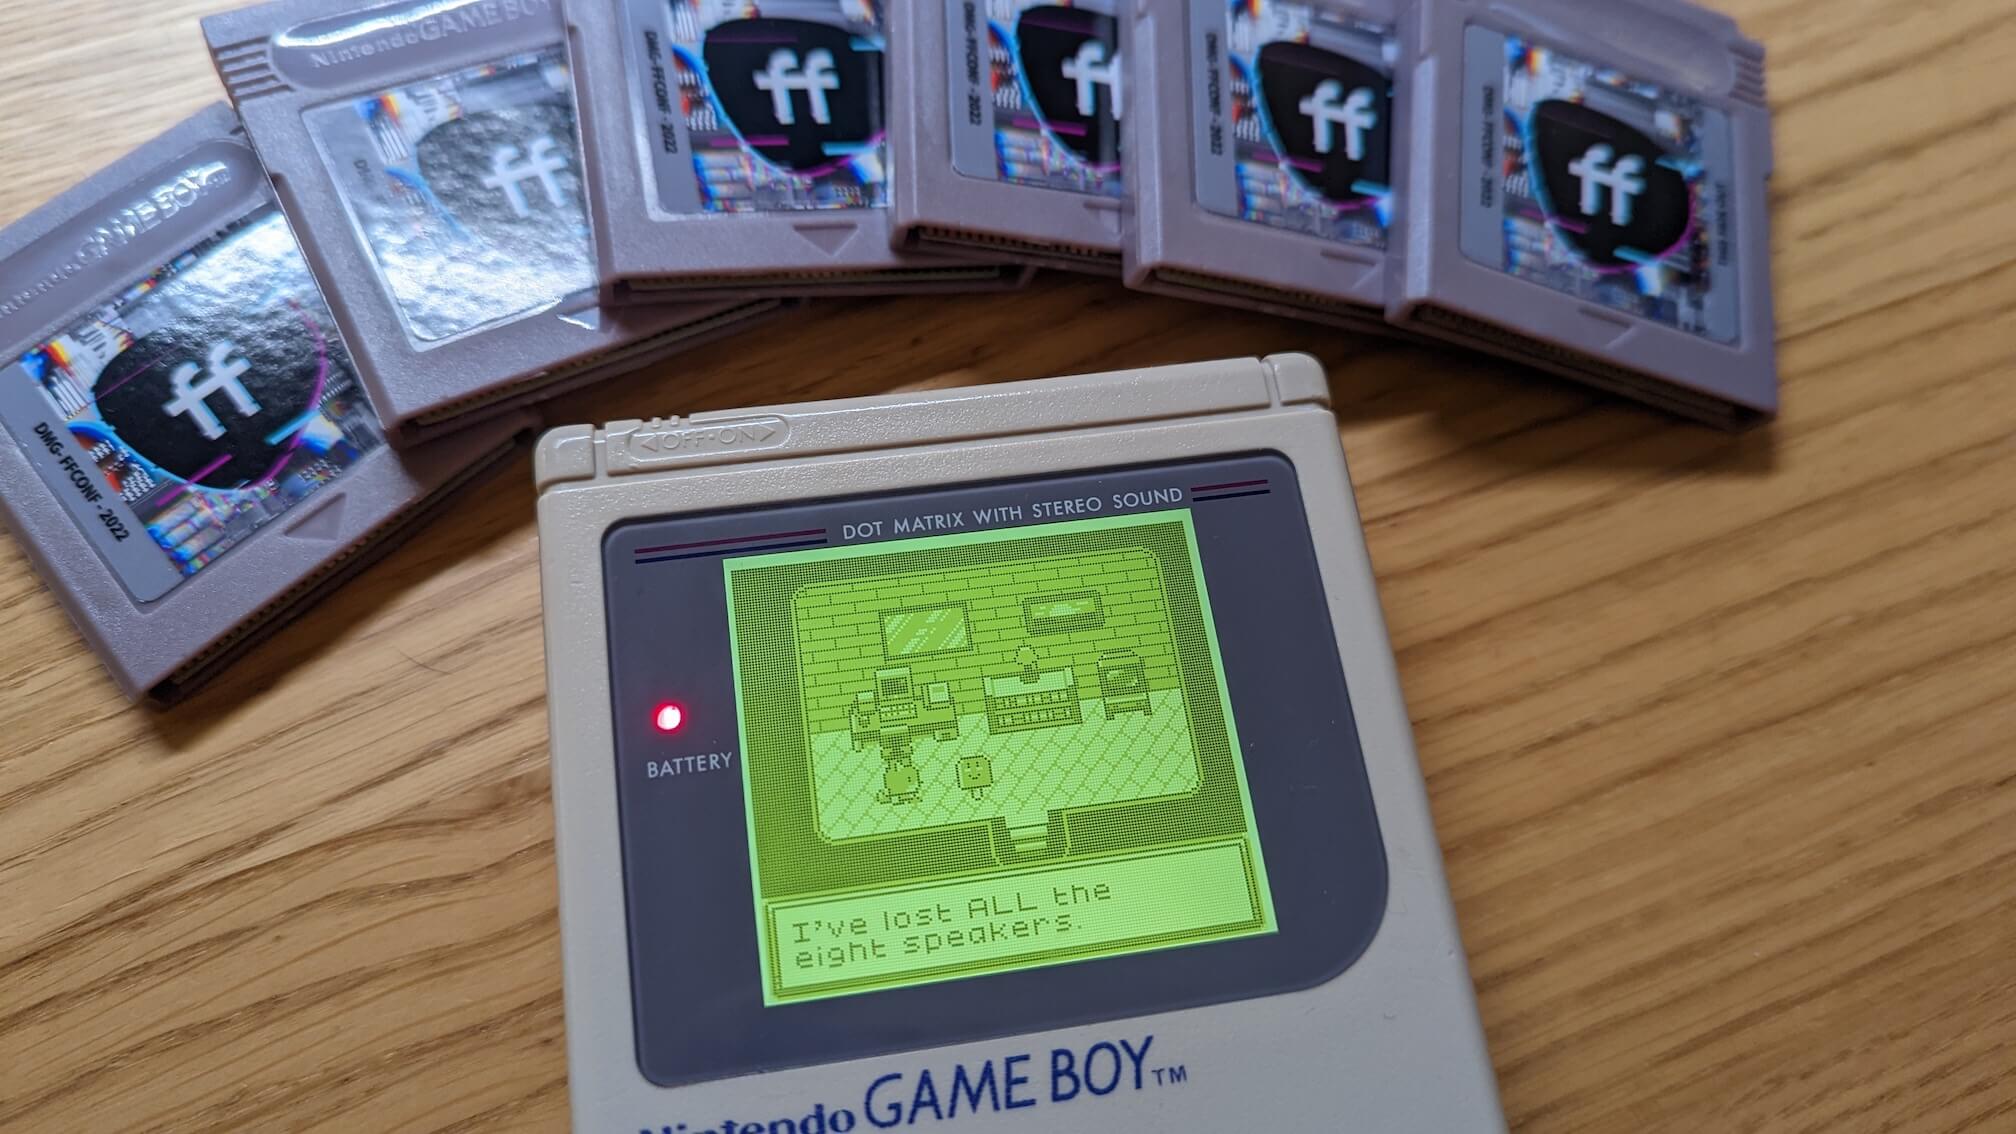 Gameboy with ffconf game